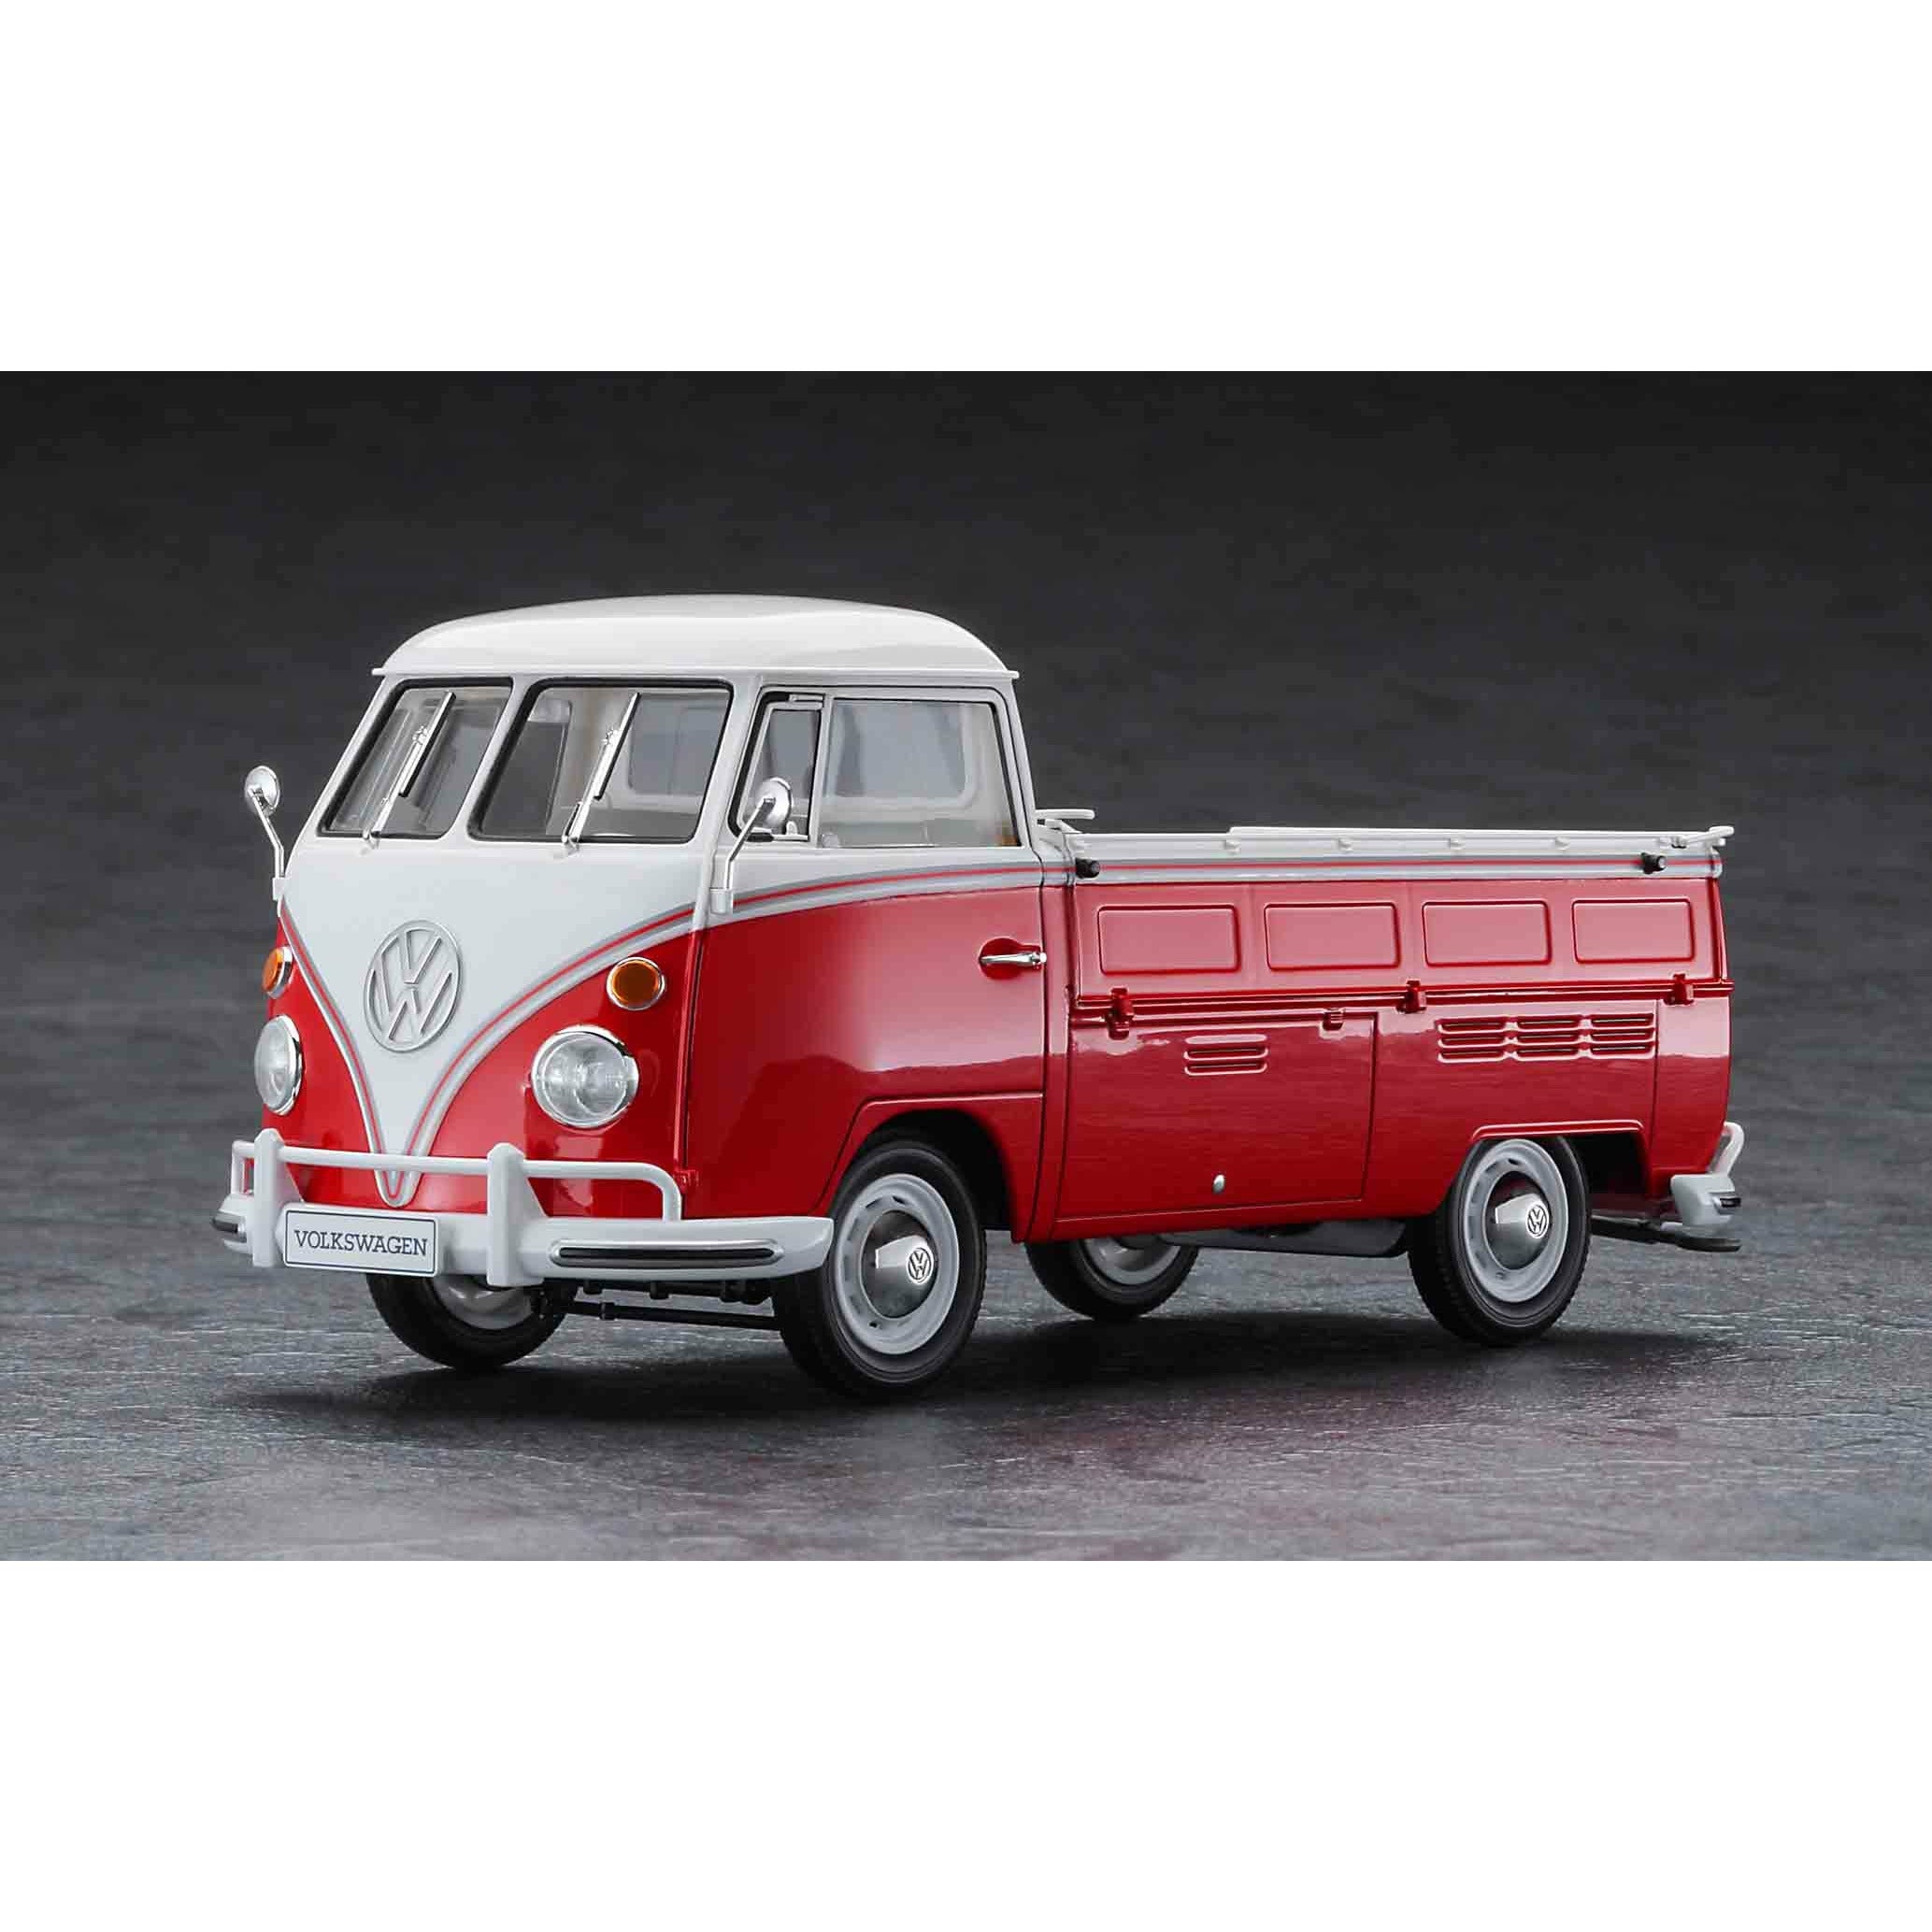 Volkswagen Type 2 Pic-Up Truck "Red/White Paint" 1/24 Model Car Kit #20556 by Hasegawa